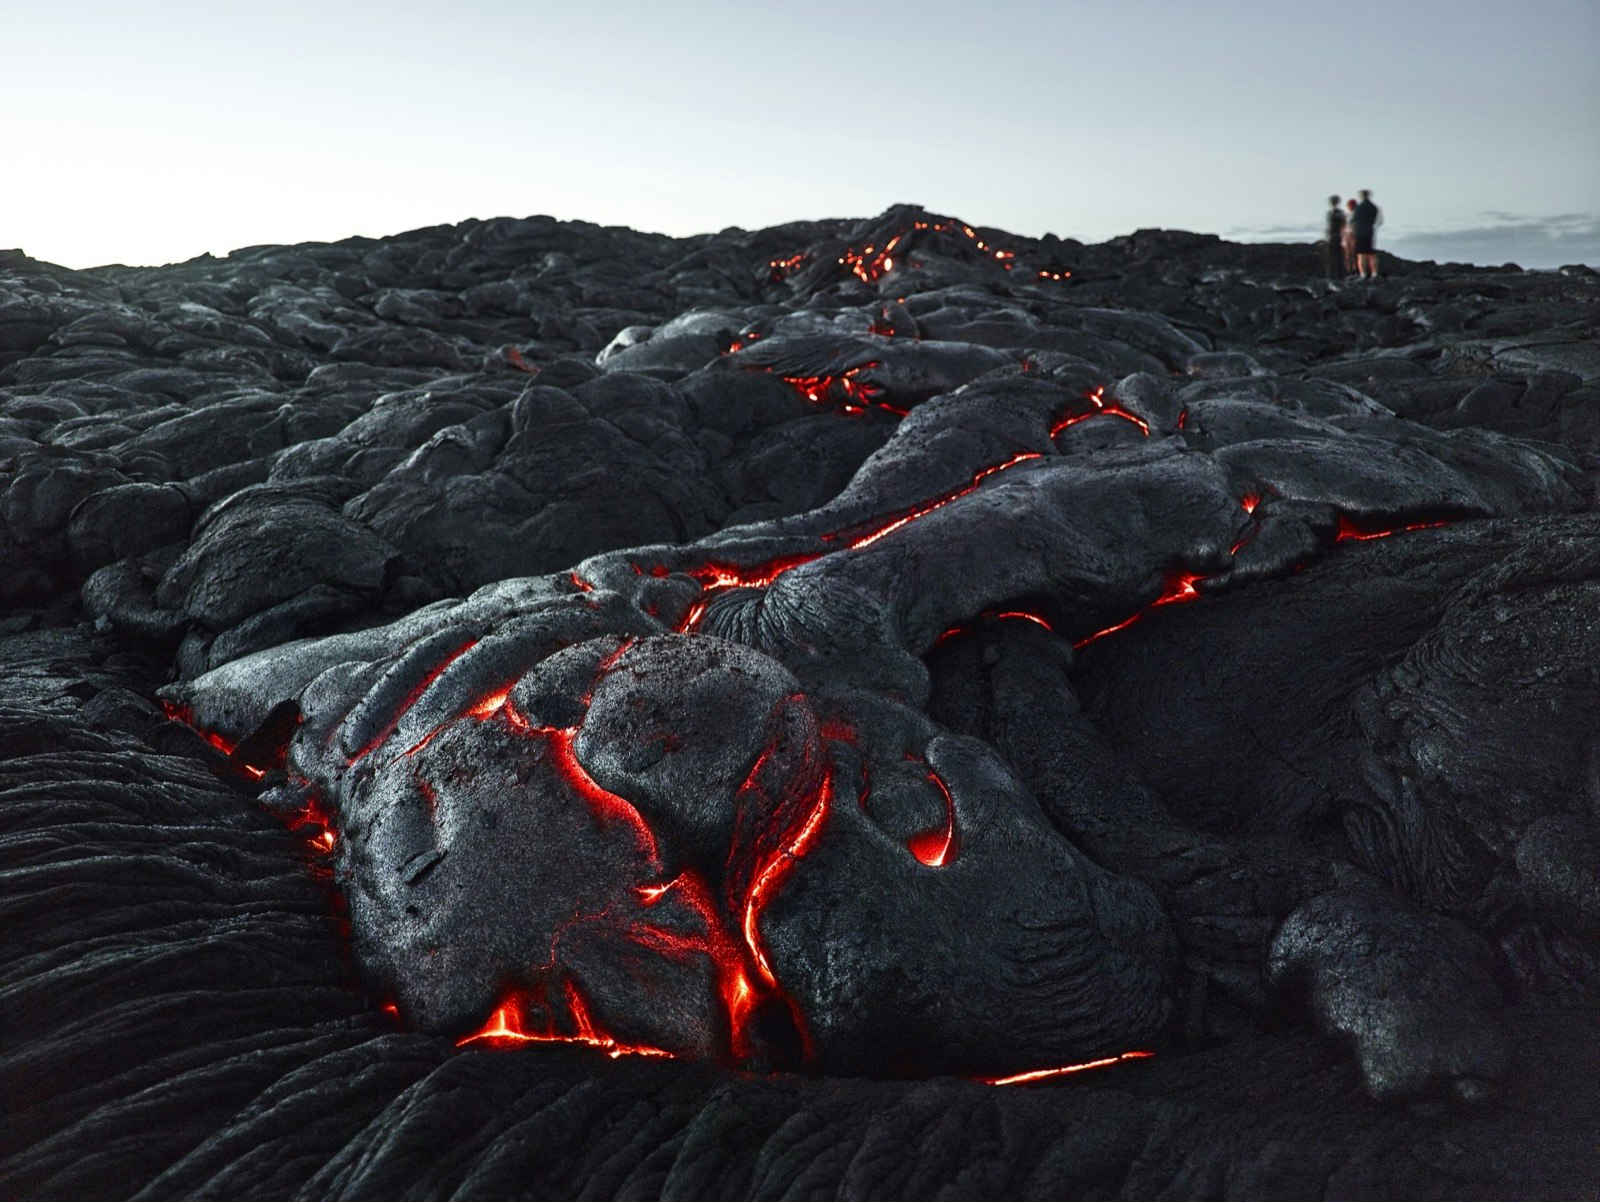 People stand in the background as hot red lava flows through the cracks of black hardened lava